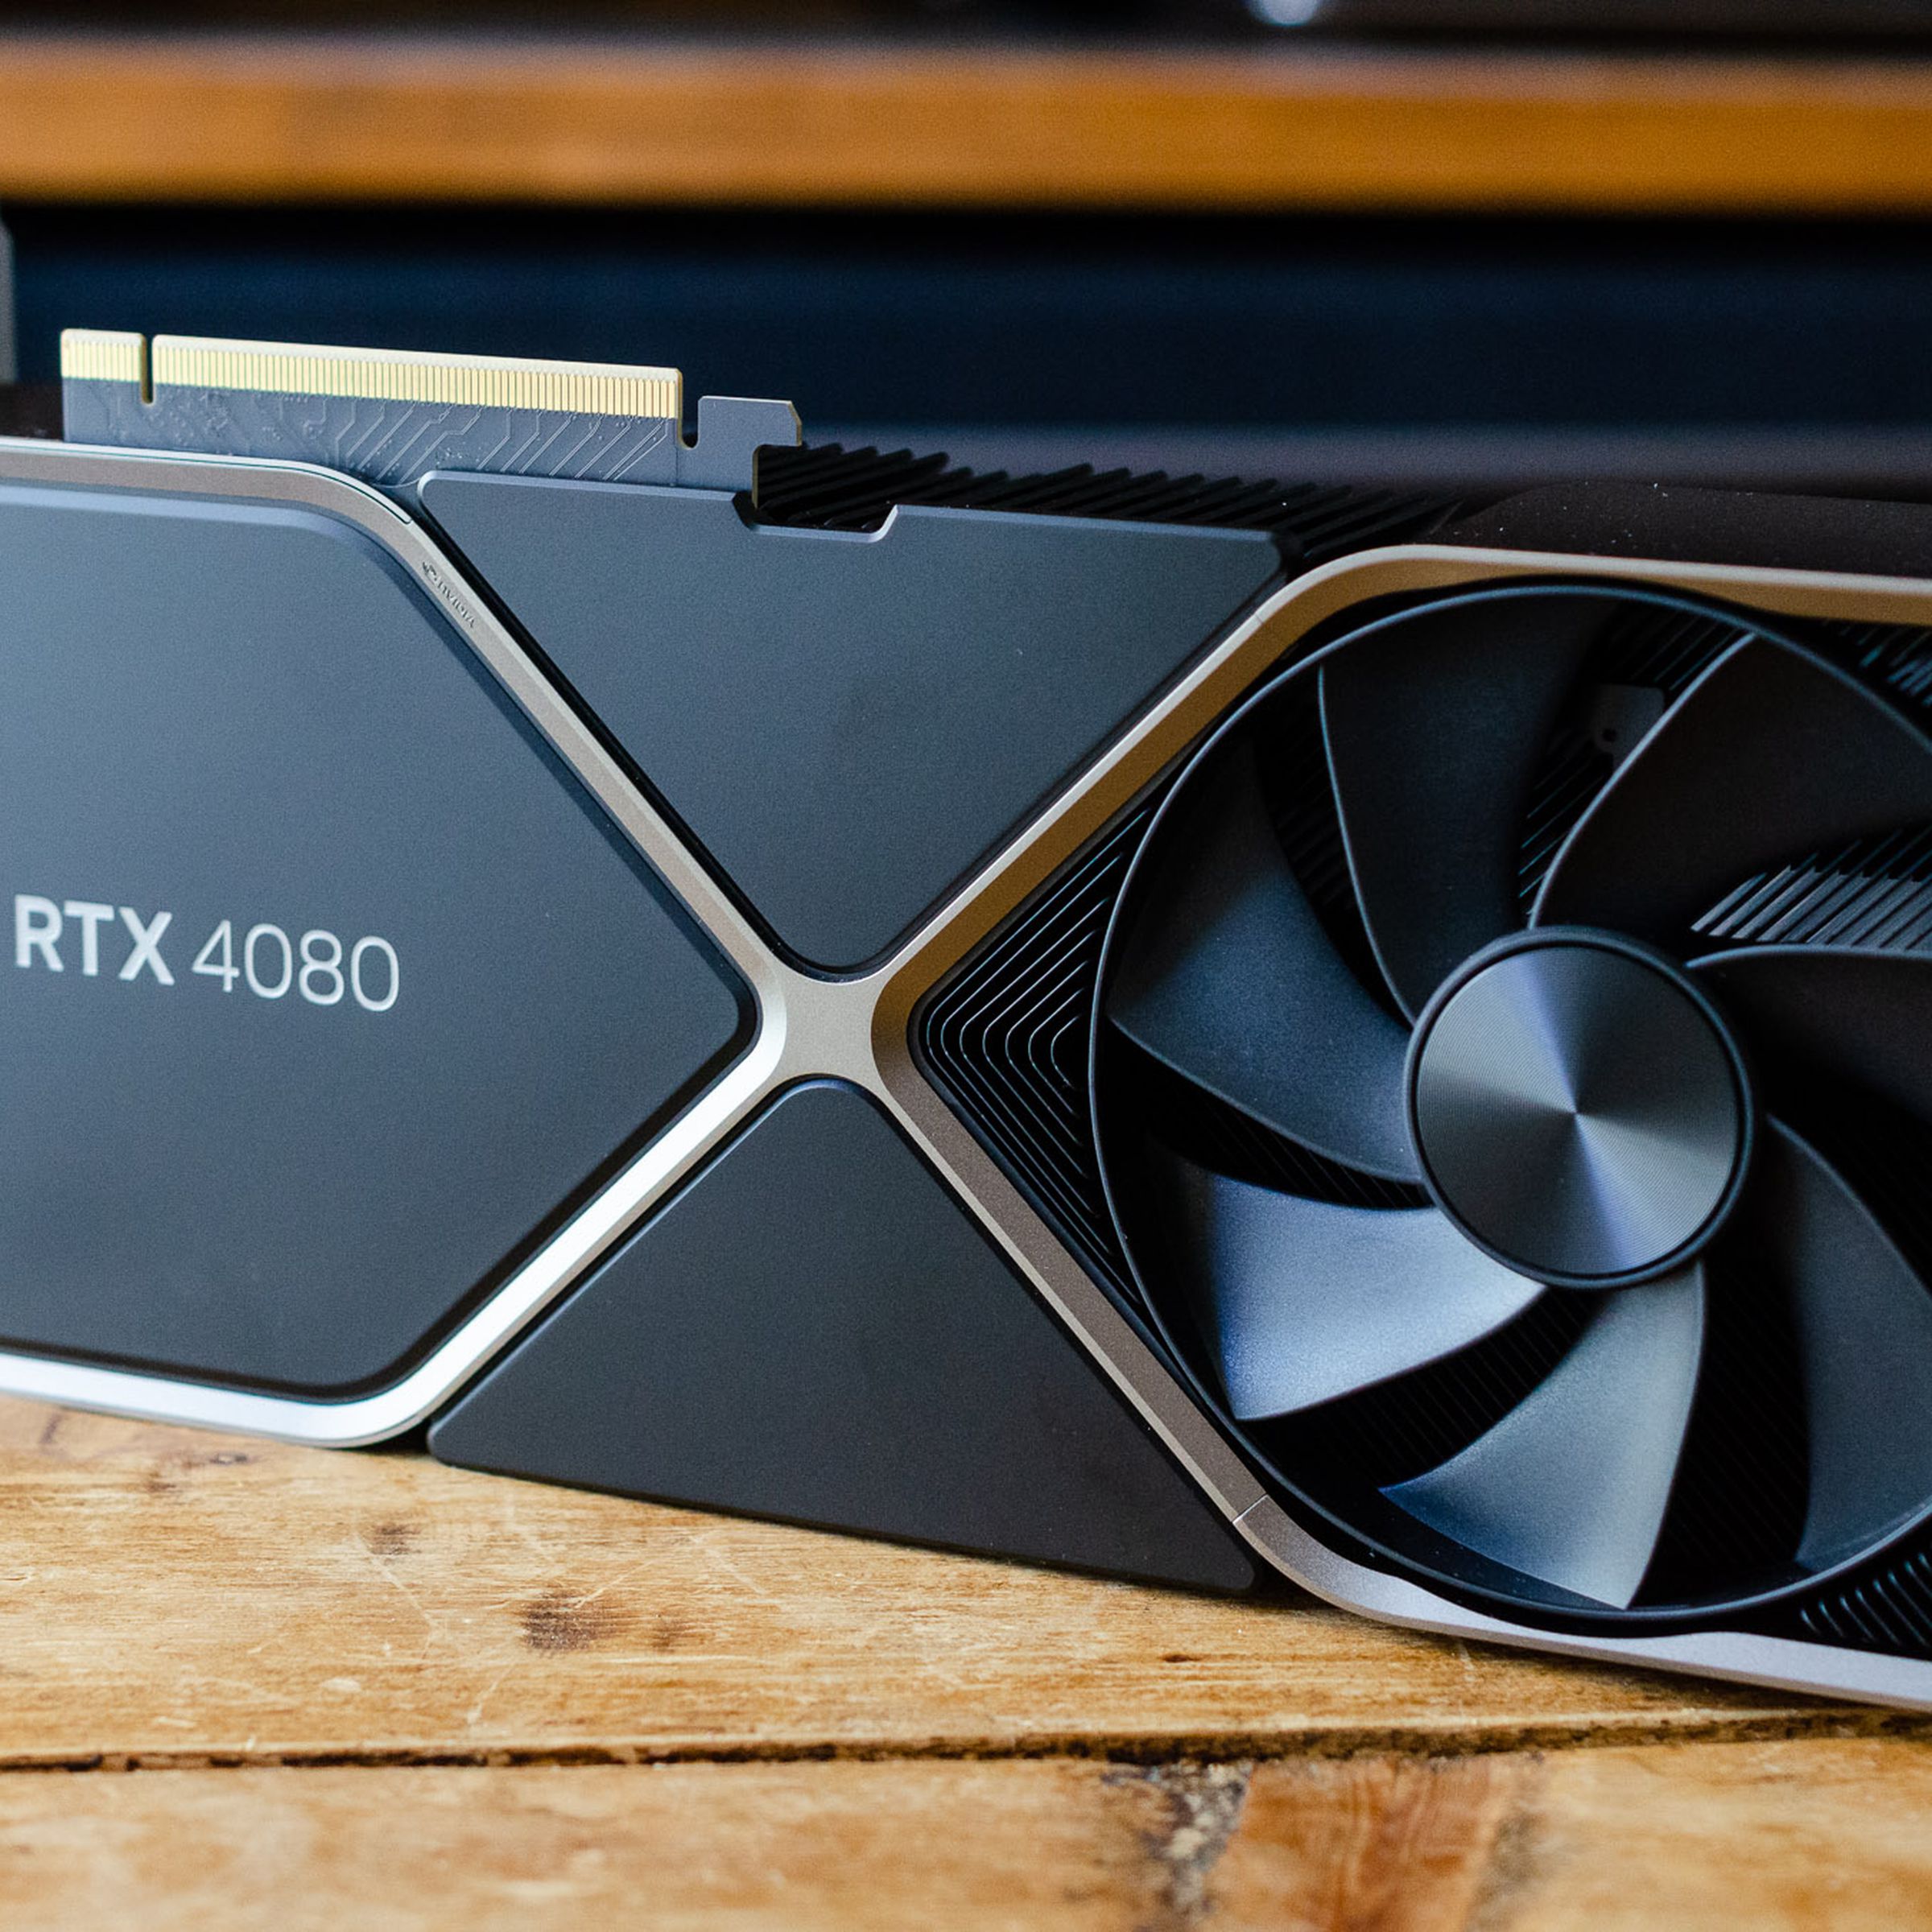 Nvidia’s RTX 4080 Founders Edition GPU on a wooden table